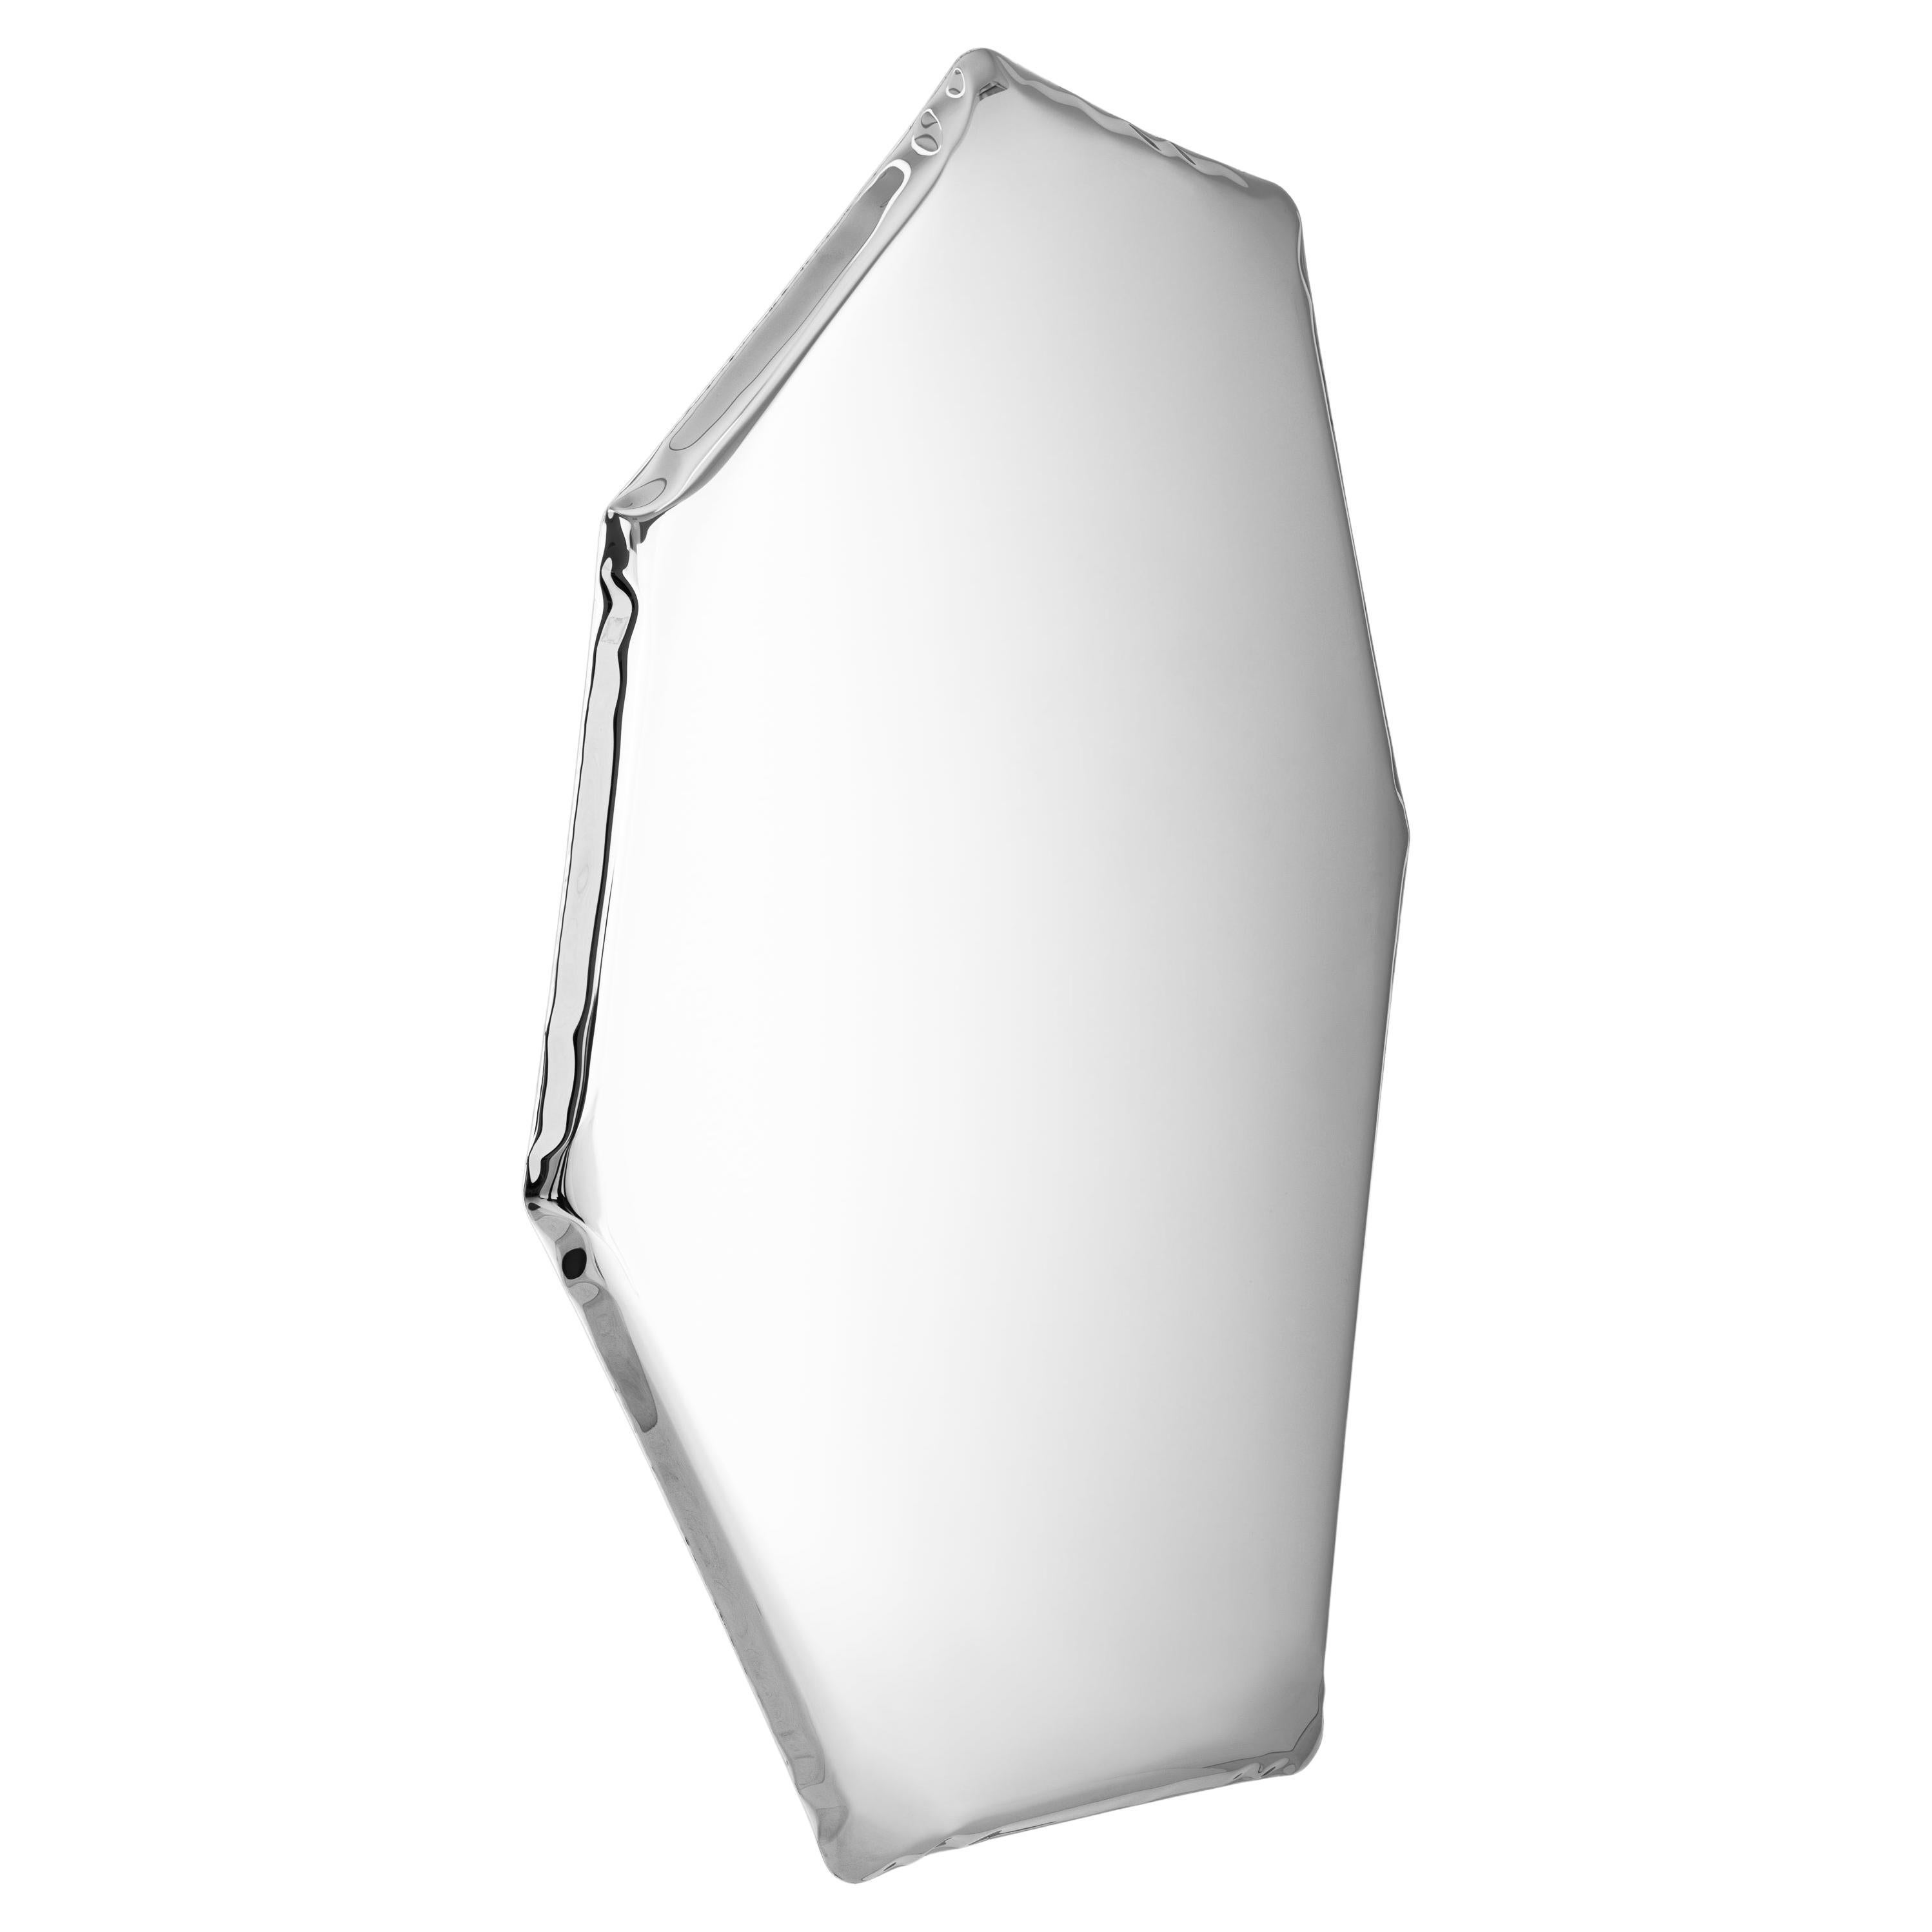 Stainless Steel Tafla C2 Sculptural Wall Mirror by Zieta For Sale